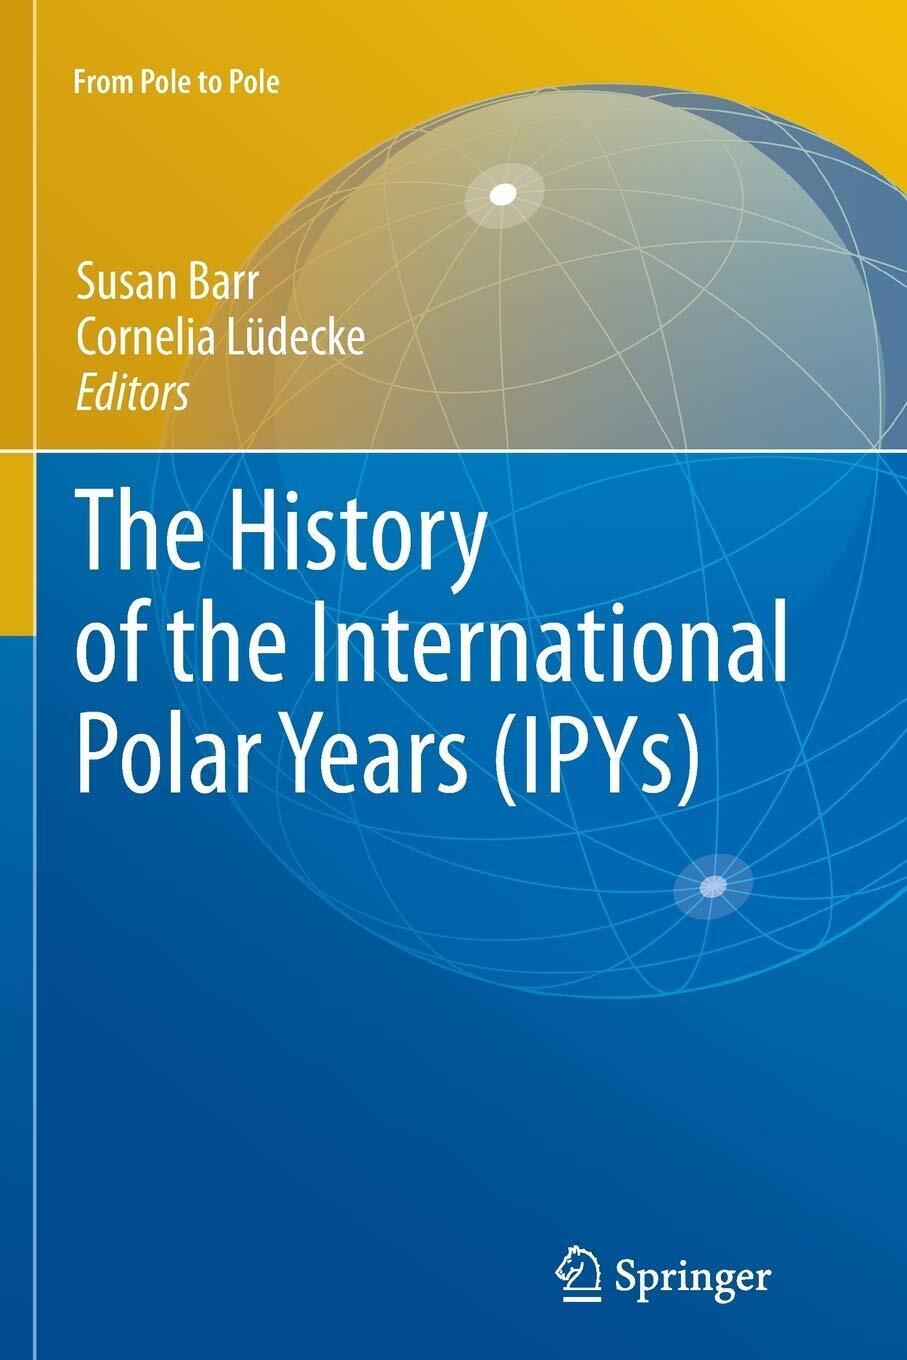 The History of the International Polar Years (IPYs) - Susan Barr - Springer,2012